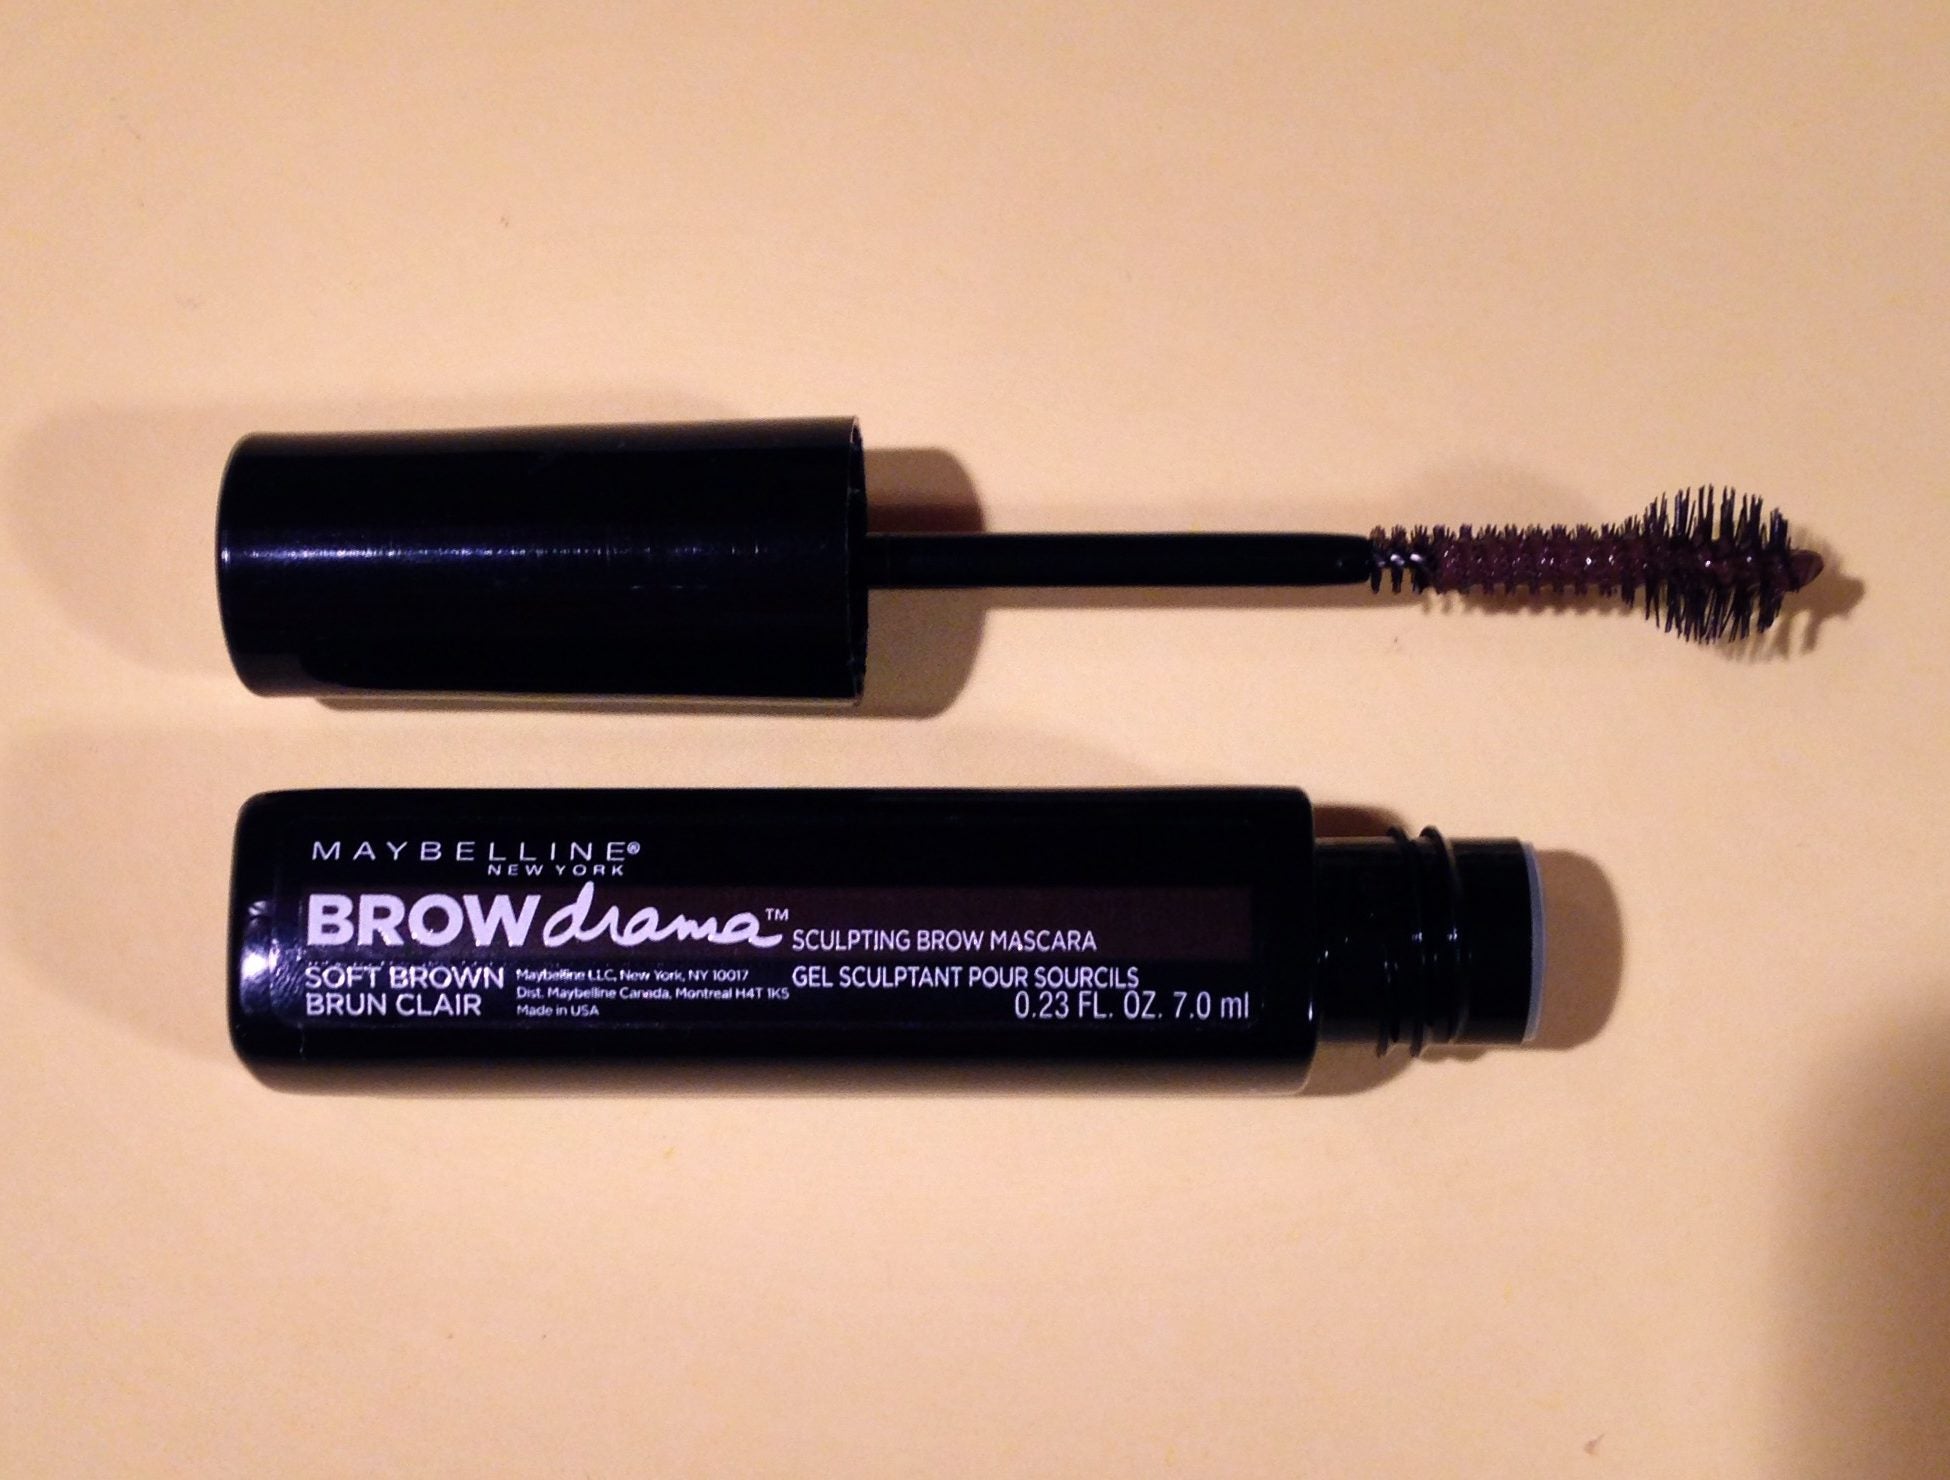 Review, B/A, Comparison, Photos, Swatches, Maybelline, Brow, Drama, Sculpting, Brow, Mascara, Great, Lash, Real, Impact, Falsies, Big, Eyes, Rebel, Black, Color, Sensational, The, Mattes, Lipstick